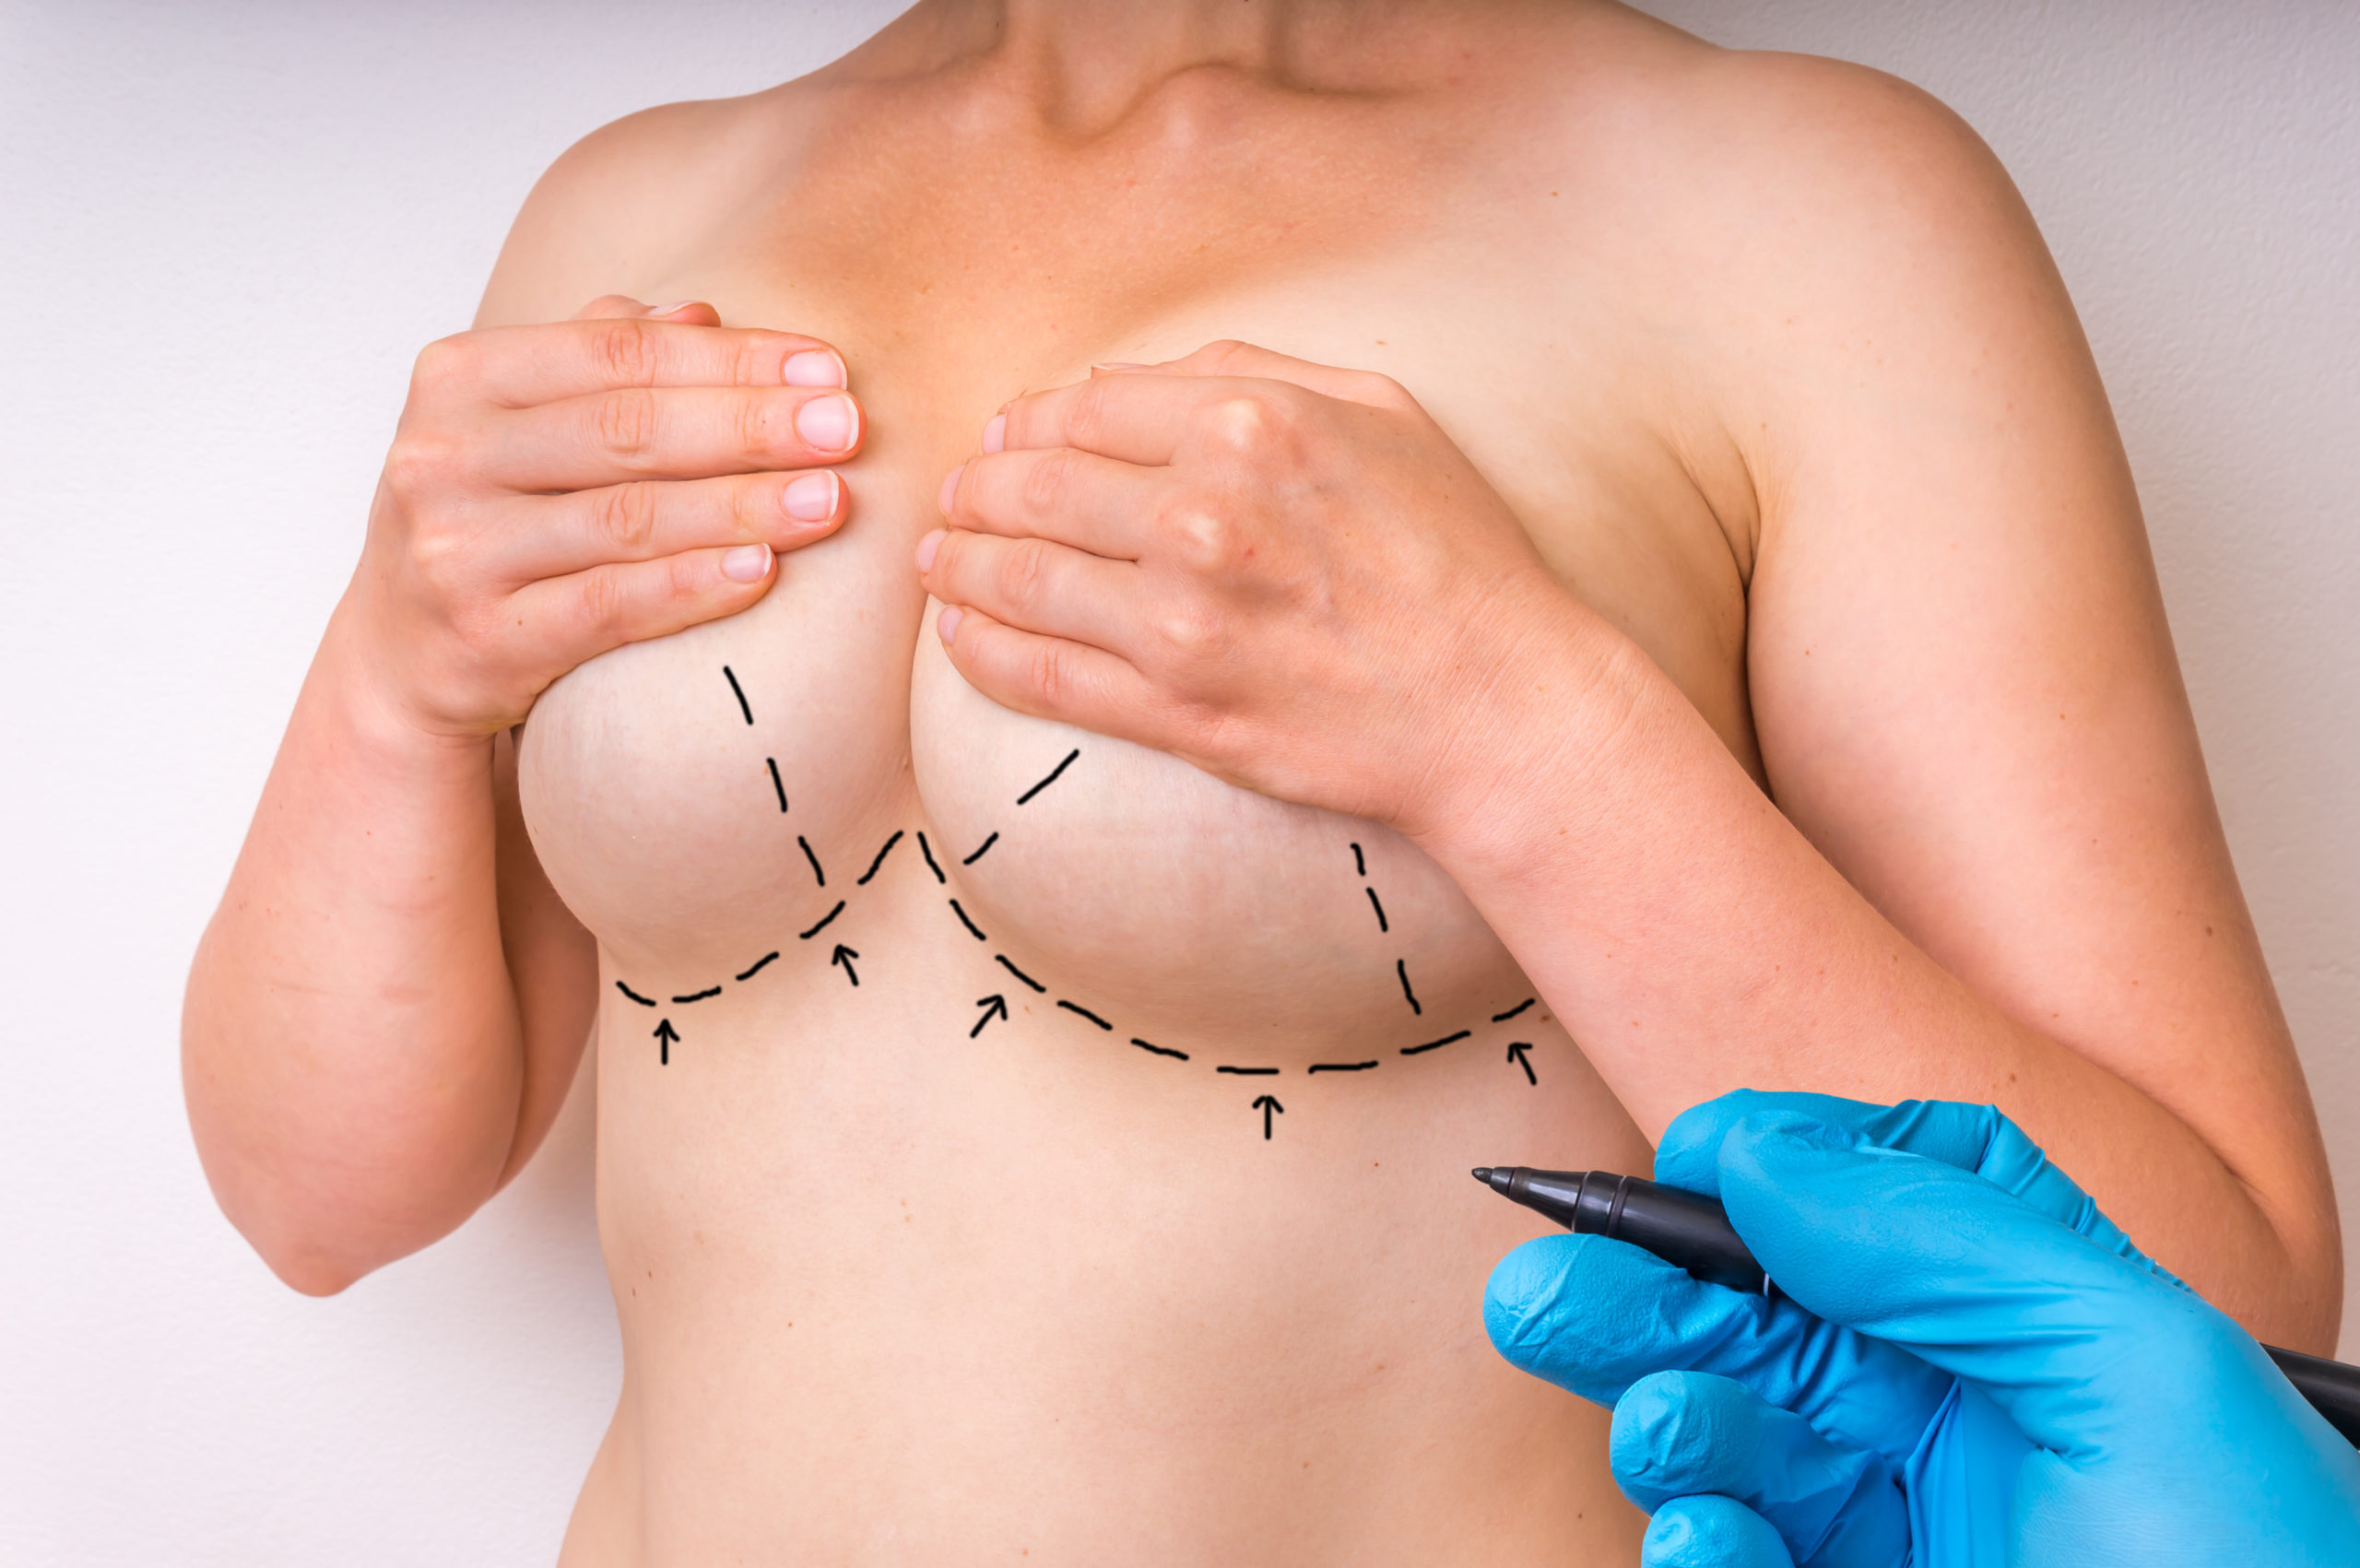 Recovery tips to be kept in mind following the breast reduction